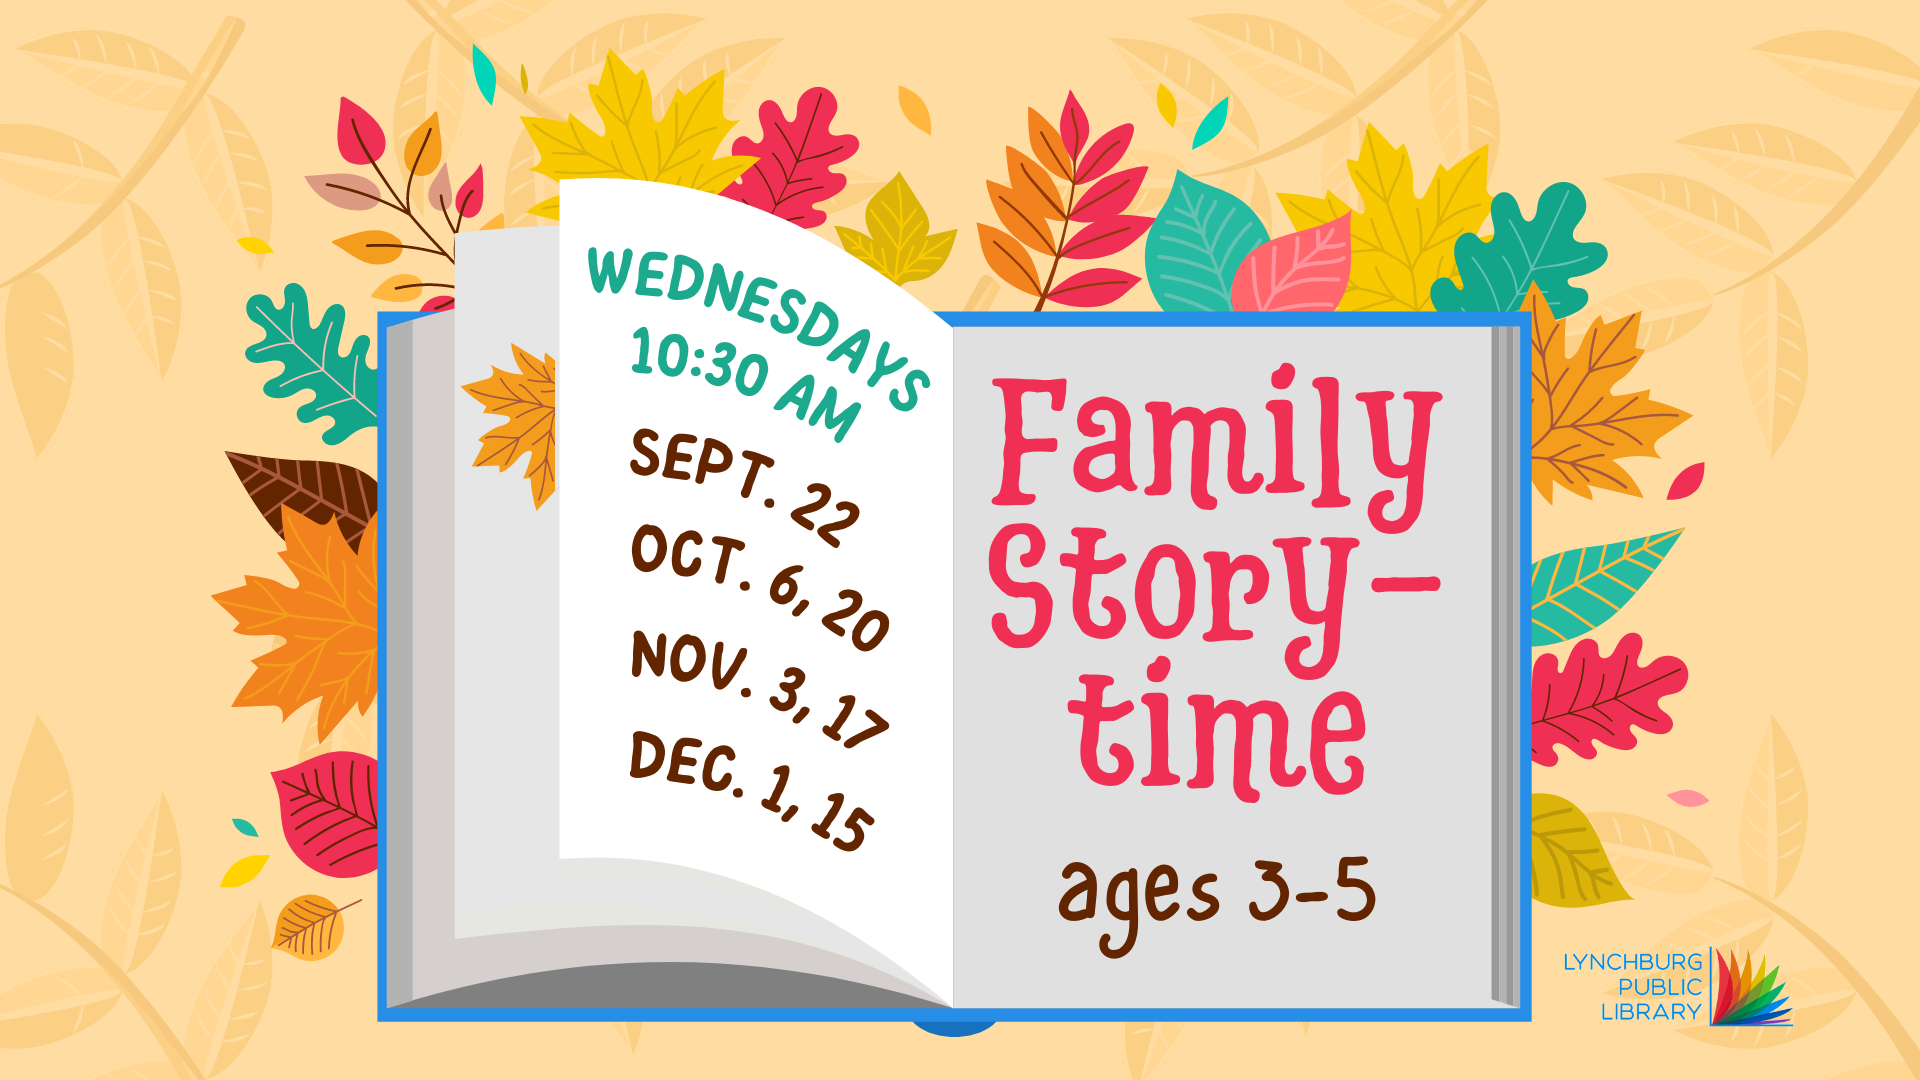 Image features an open book on a bed of leaves with the words Family Storytime, Ages 3-5 and the event dates and times as described in this event